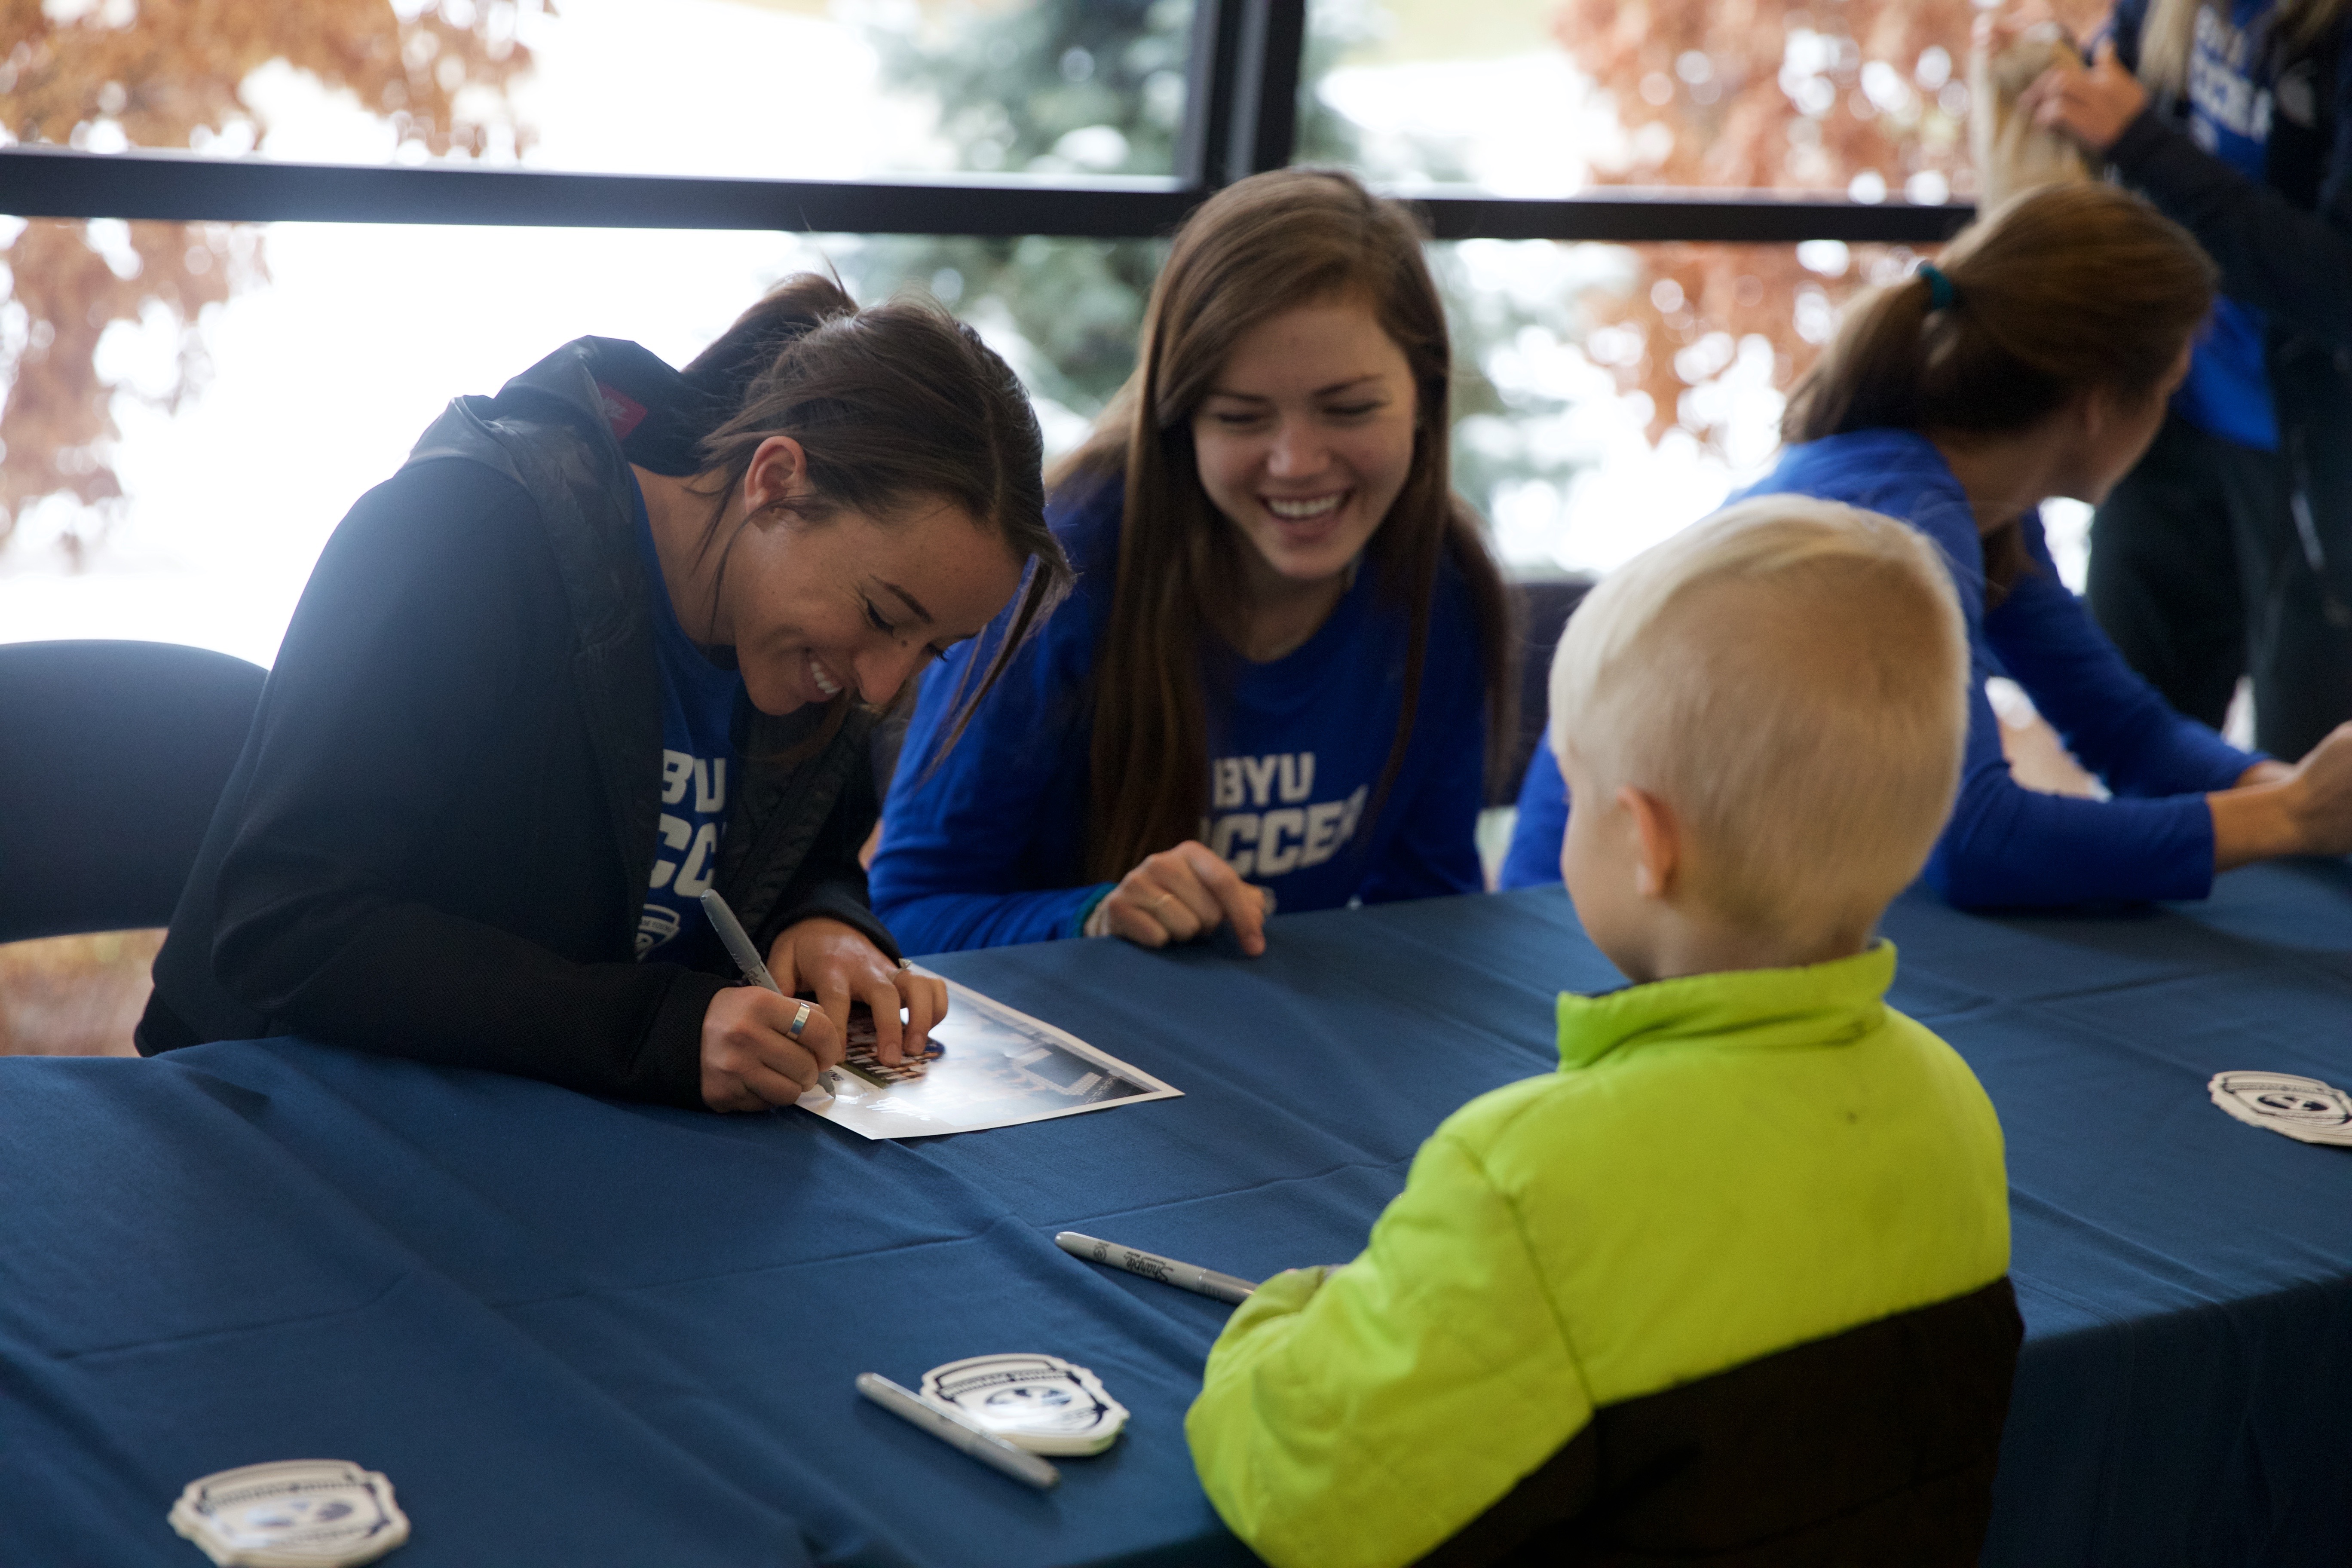 Members of the BYU women's soccer team signs autographs for a young fan. (Maddi Driggs)